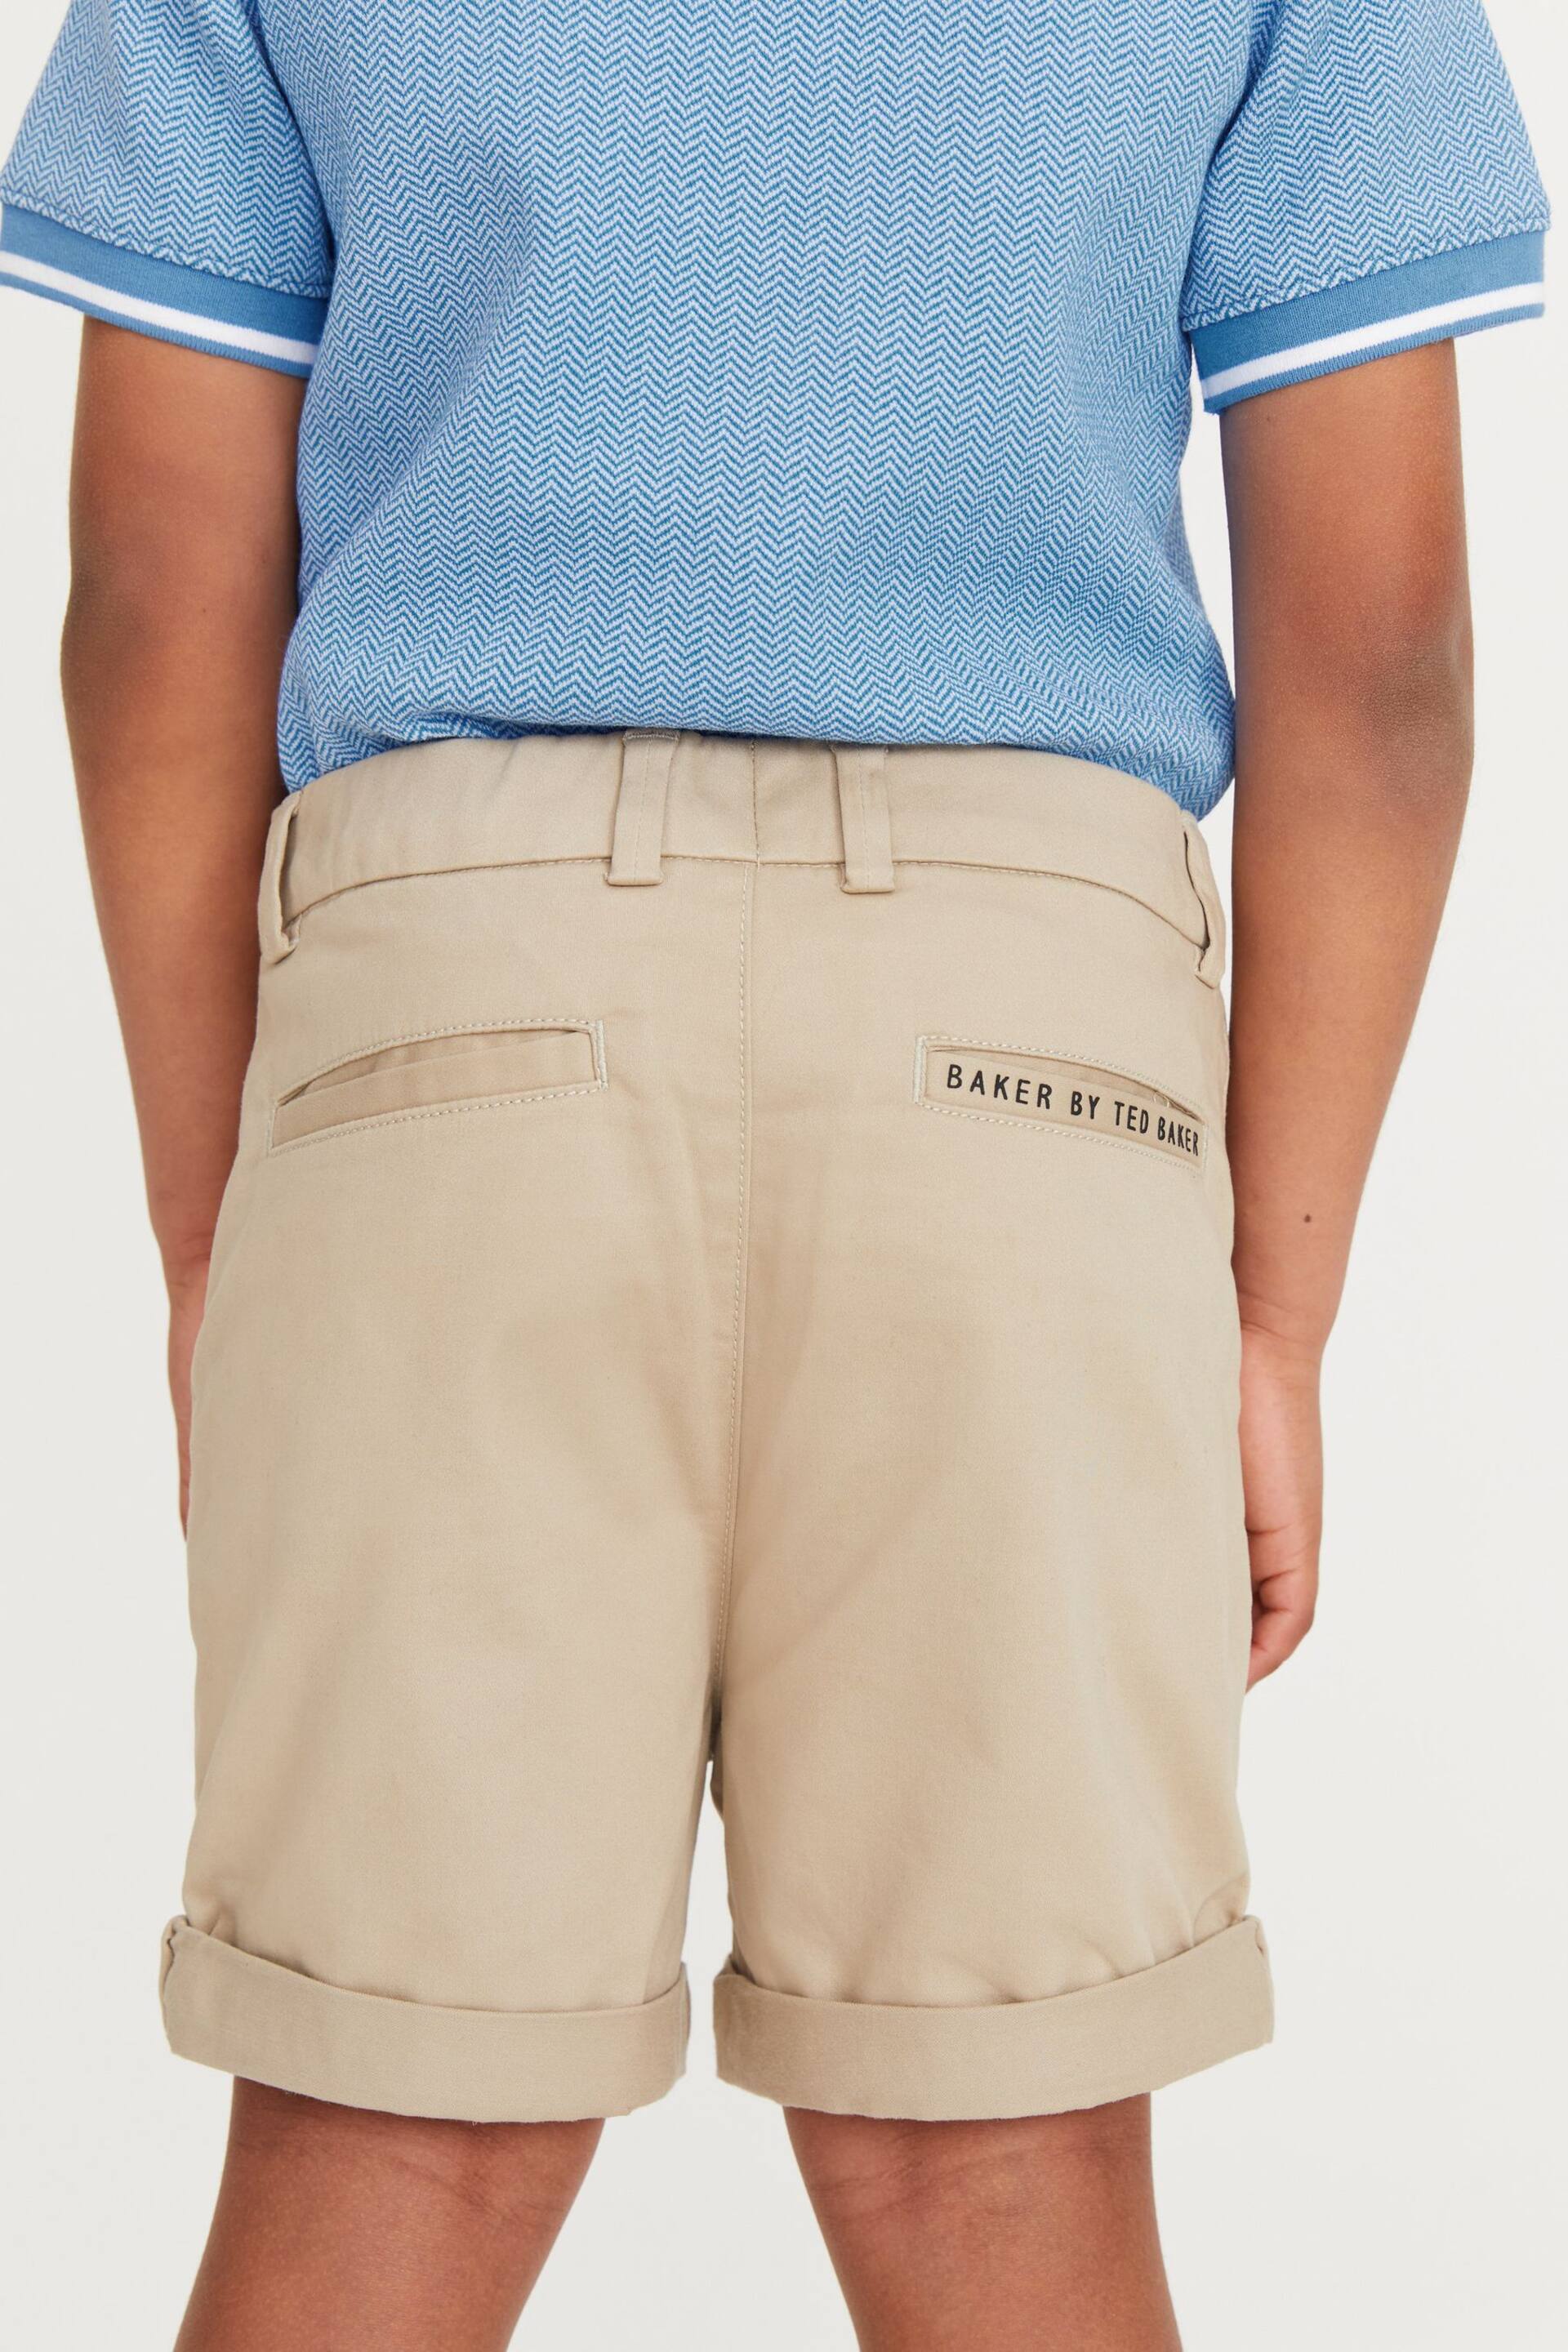 Baker by Ted Baker Chino Shorts - Image 3 of 8